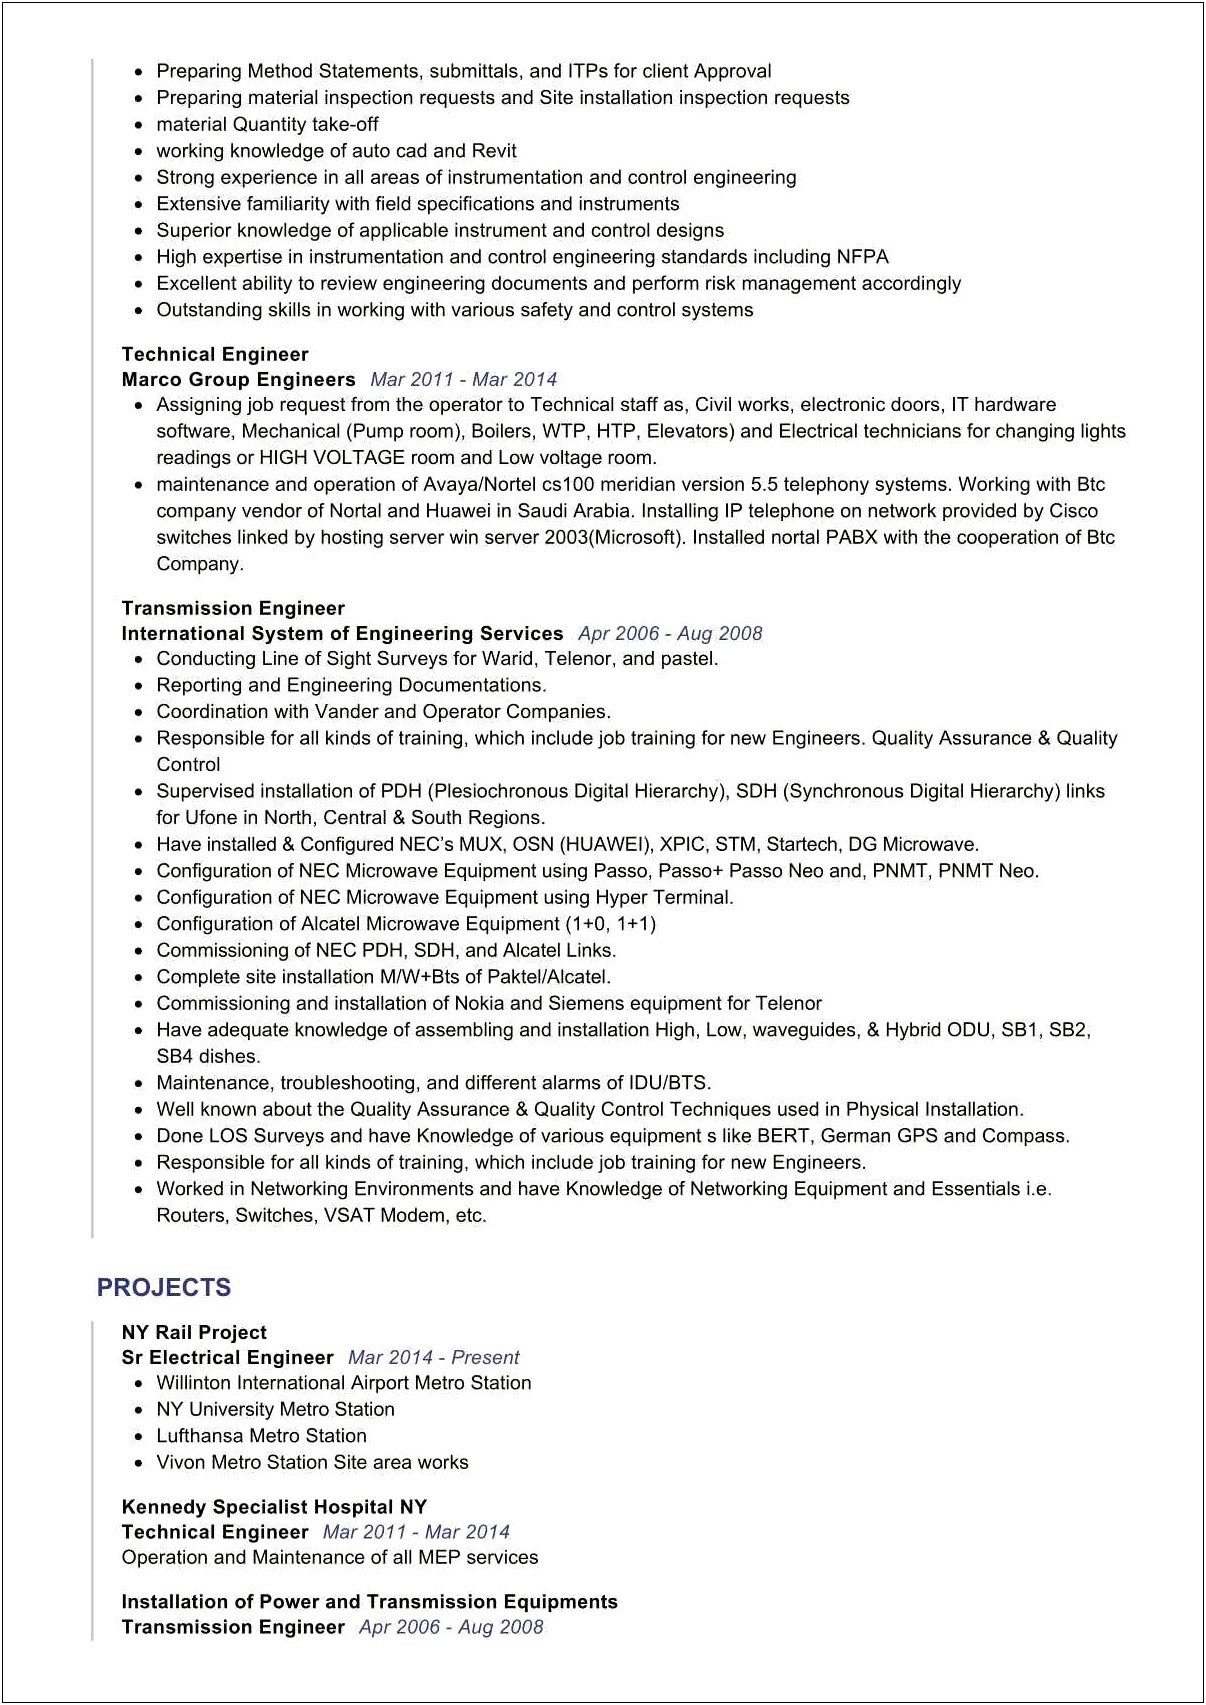 Electrical Engineering Skills For Resume Entry Level